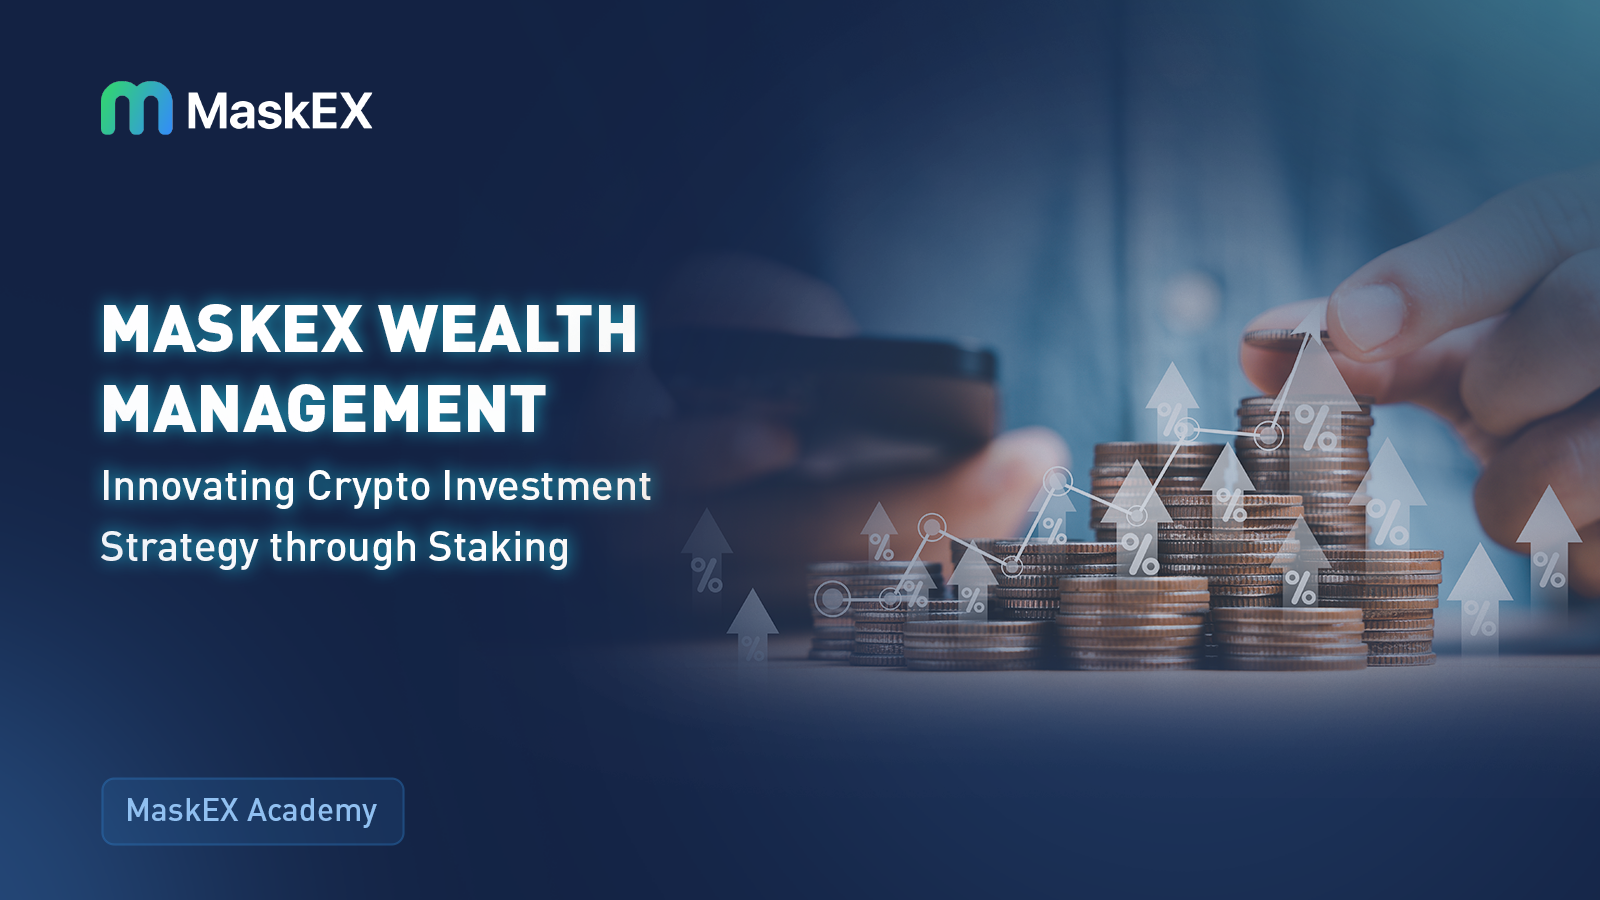 MaskEX Wealth Management: Innovating Crypto Investment Strategy through Staking